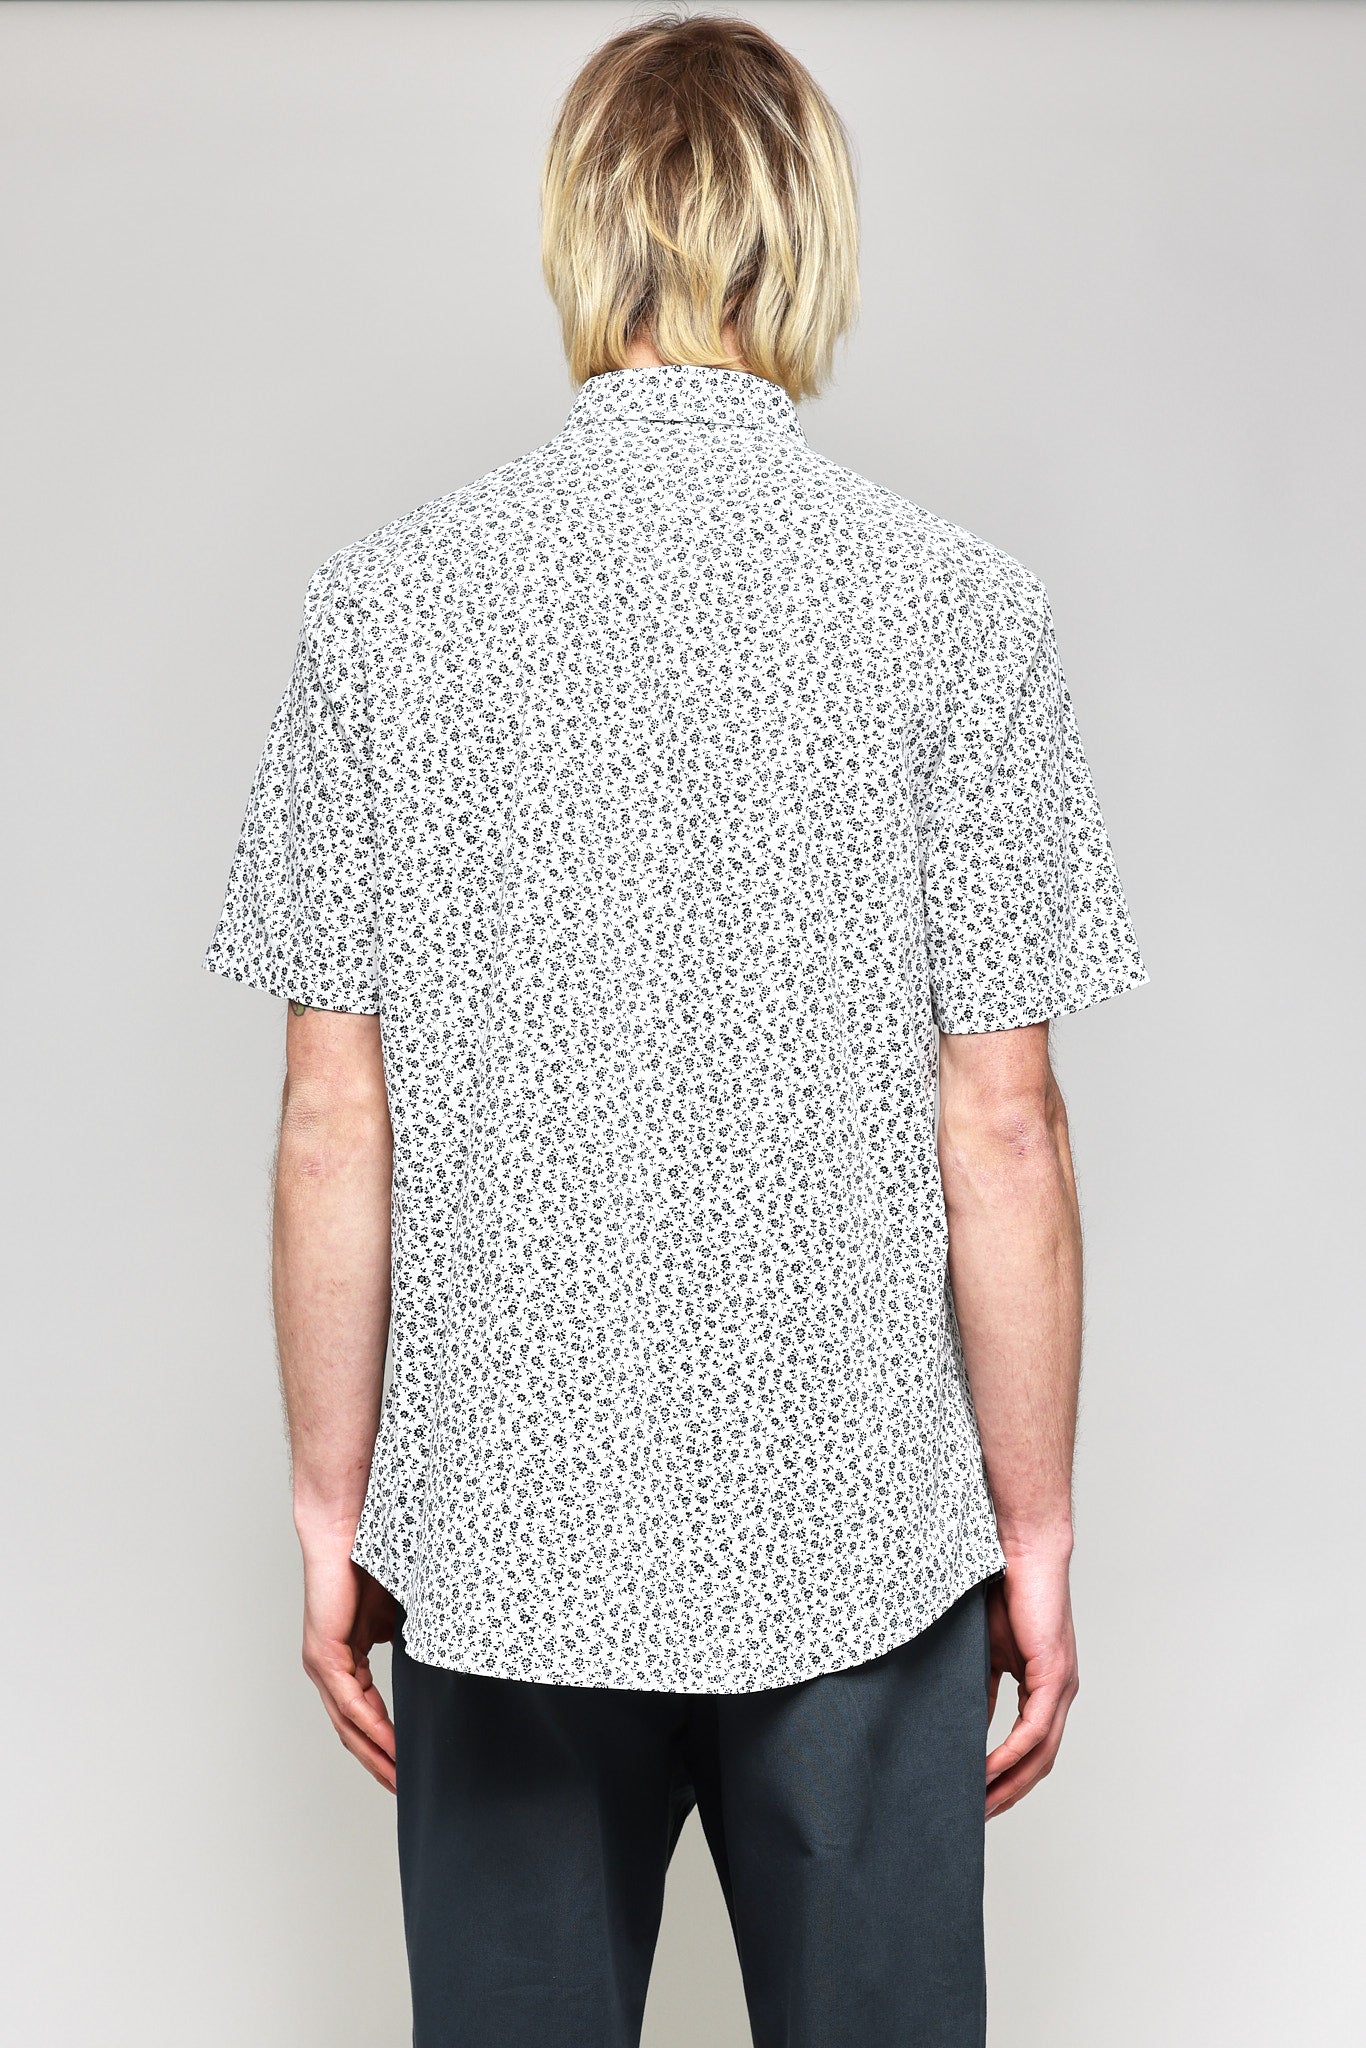 Japanese Peony Print in White and Black 03